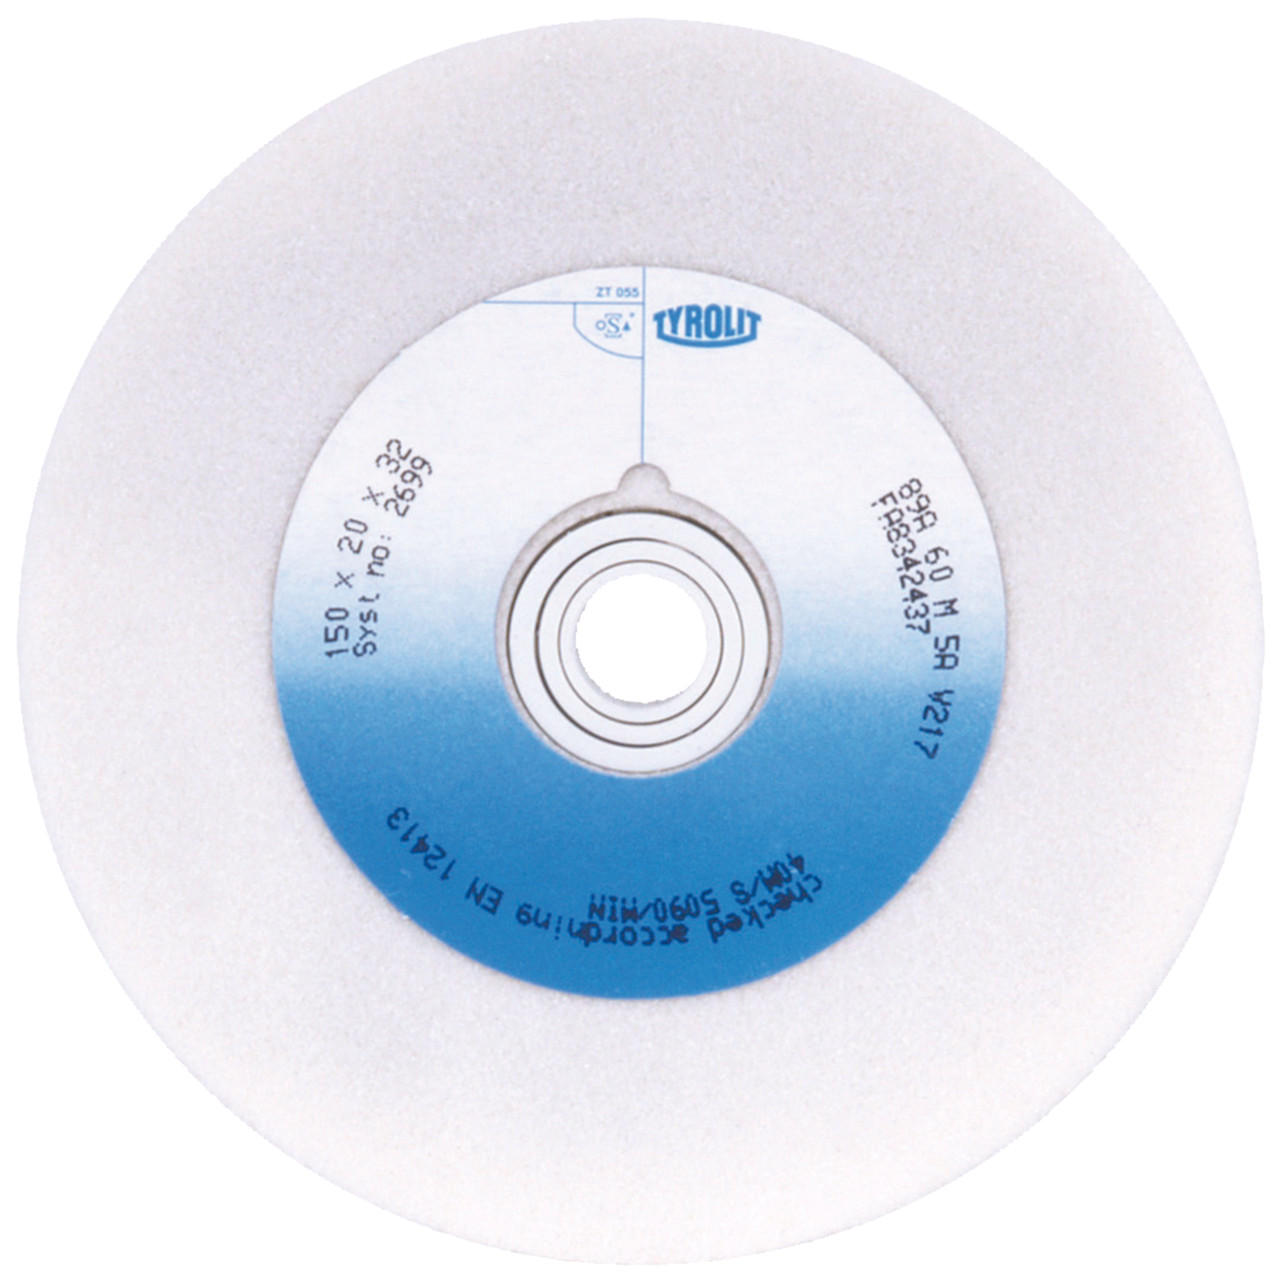 Tyrolit Conventional ceramic grinding discs DxDxH 200x25x51 For high-alloy steels and HSS, shape: 1, Art. 33435